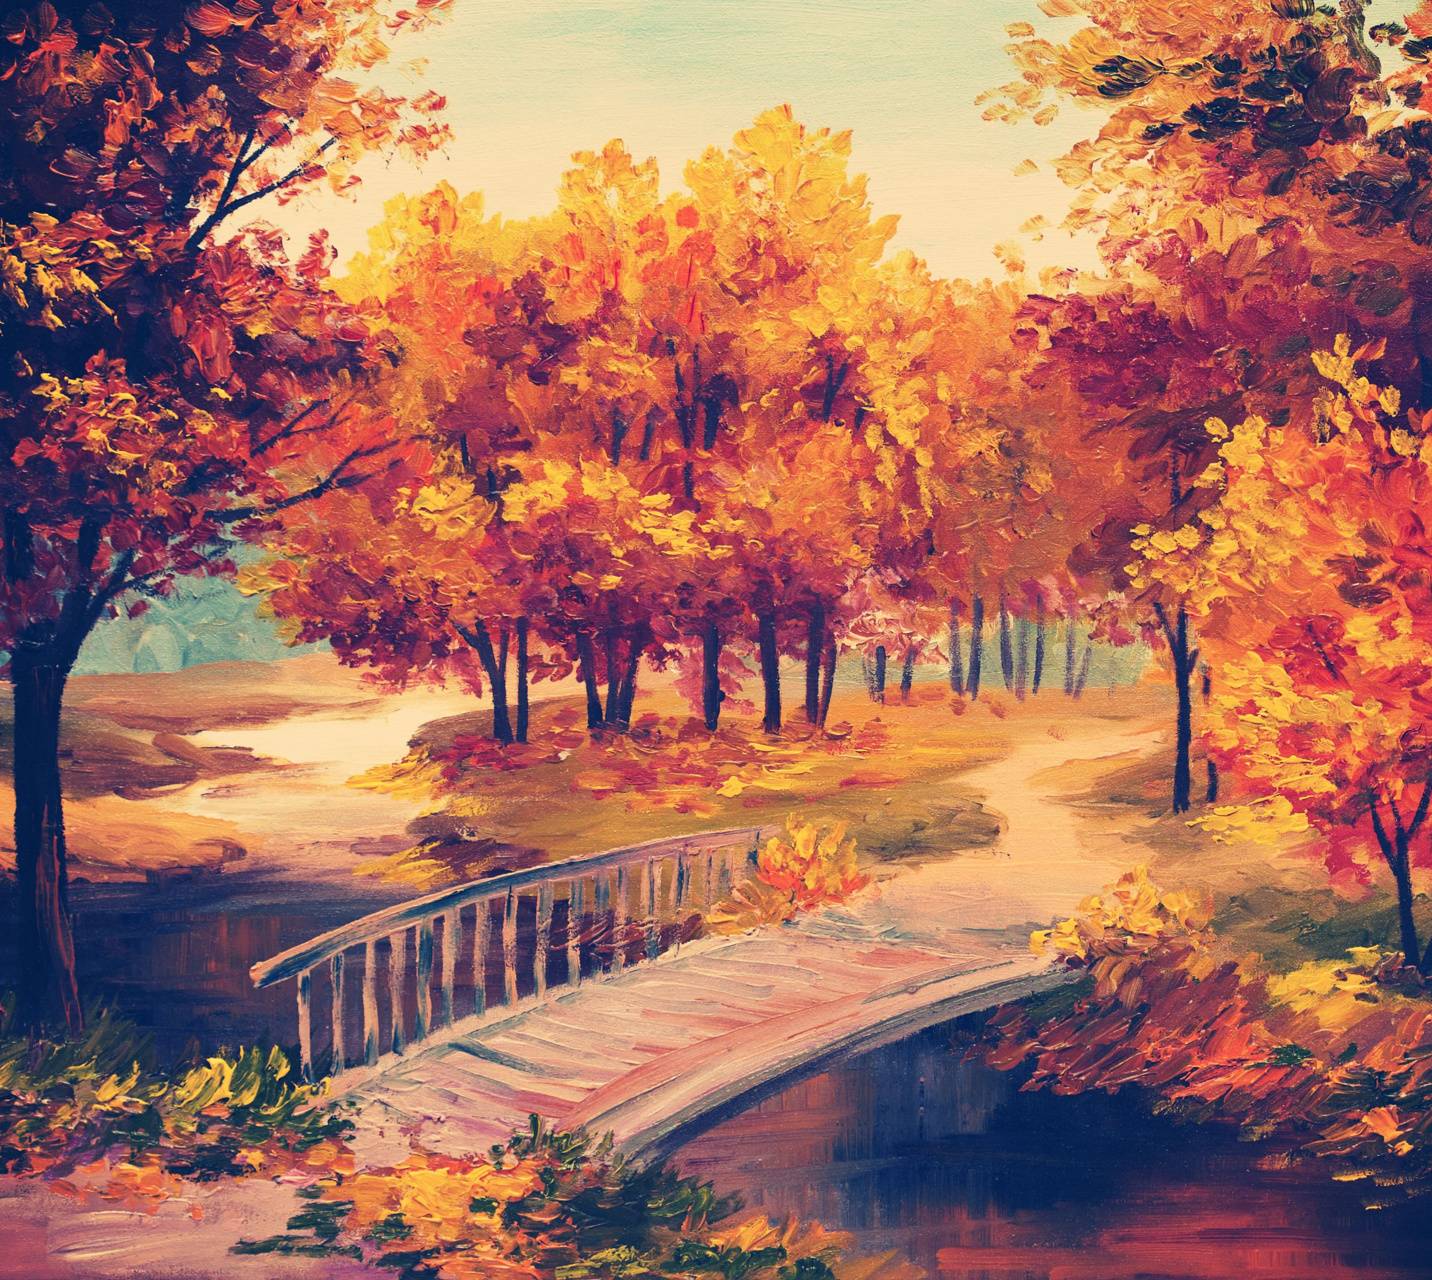 Autumn Painting Wallpapers - Top Free Autumn Painting Backgrounds ...